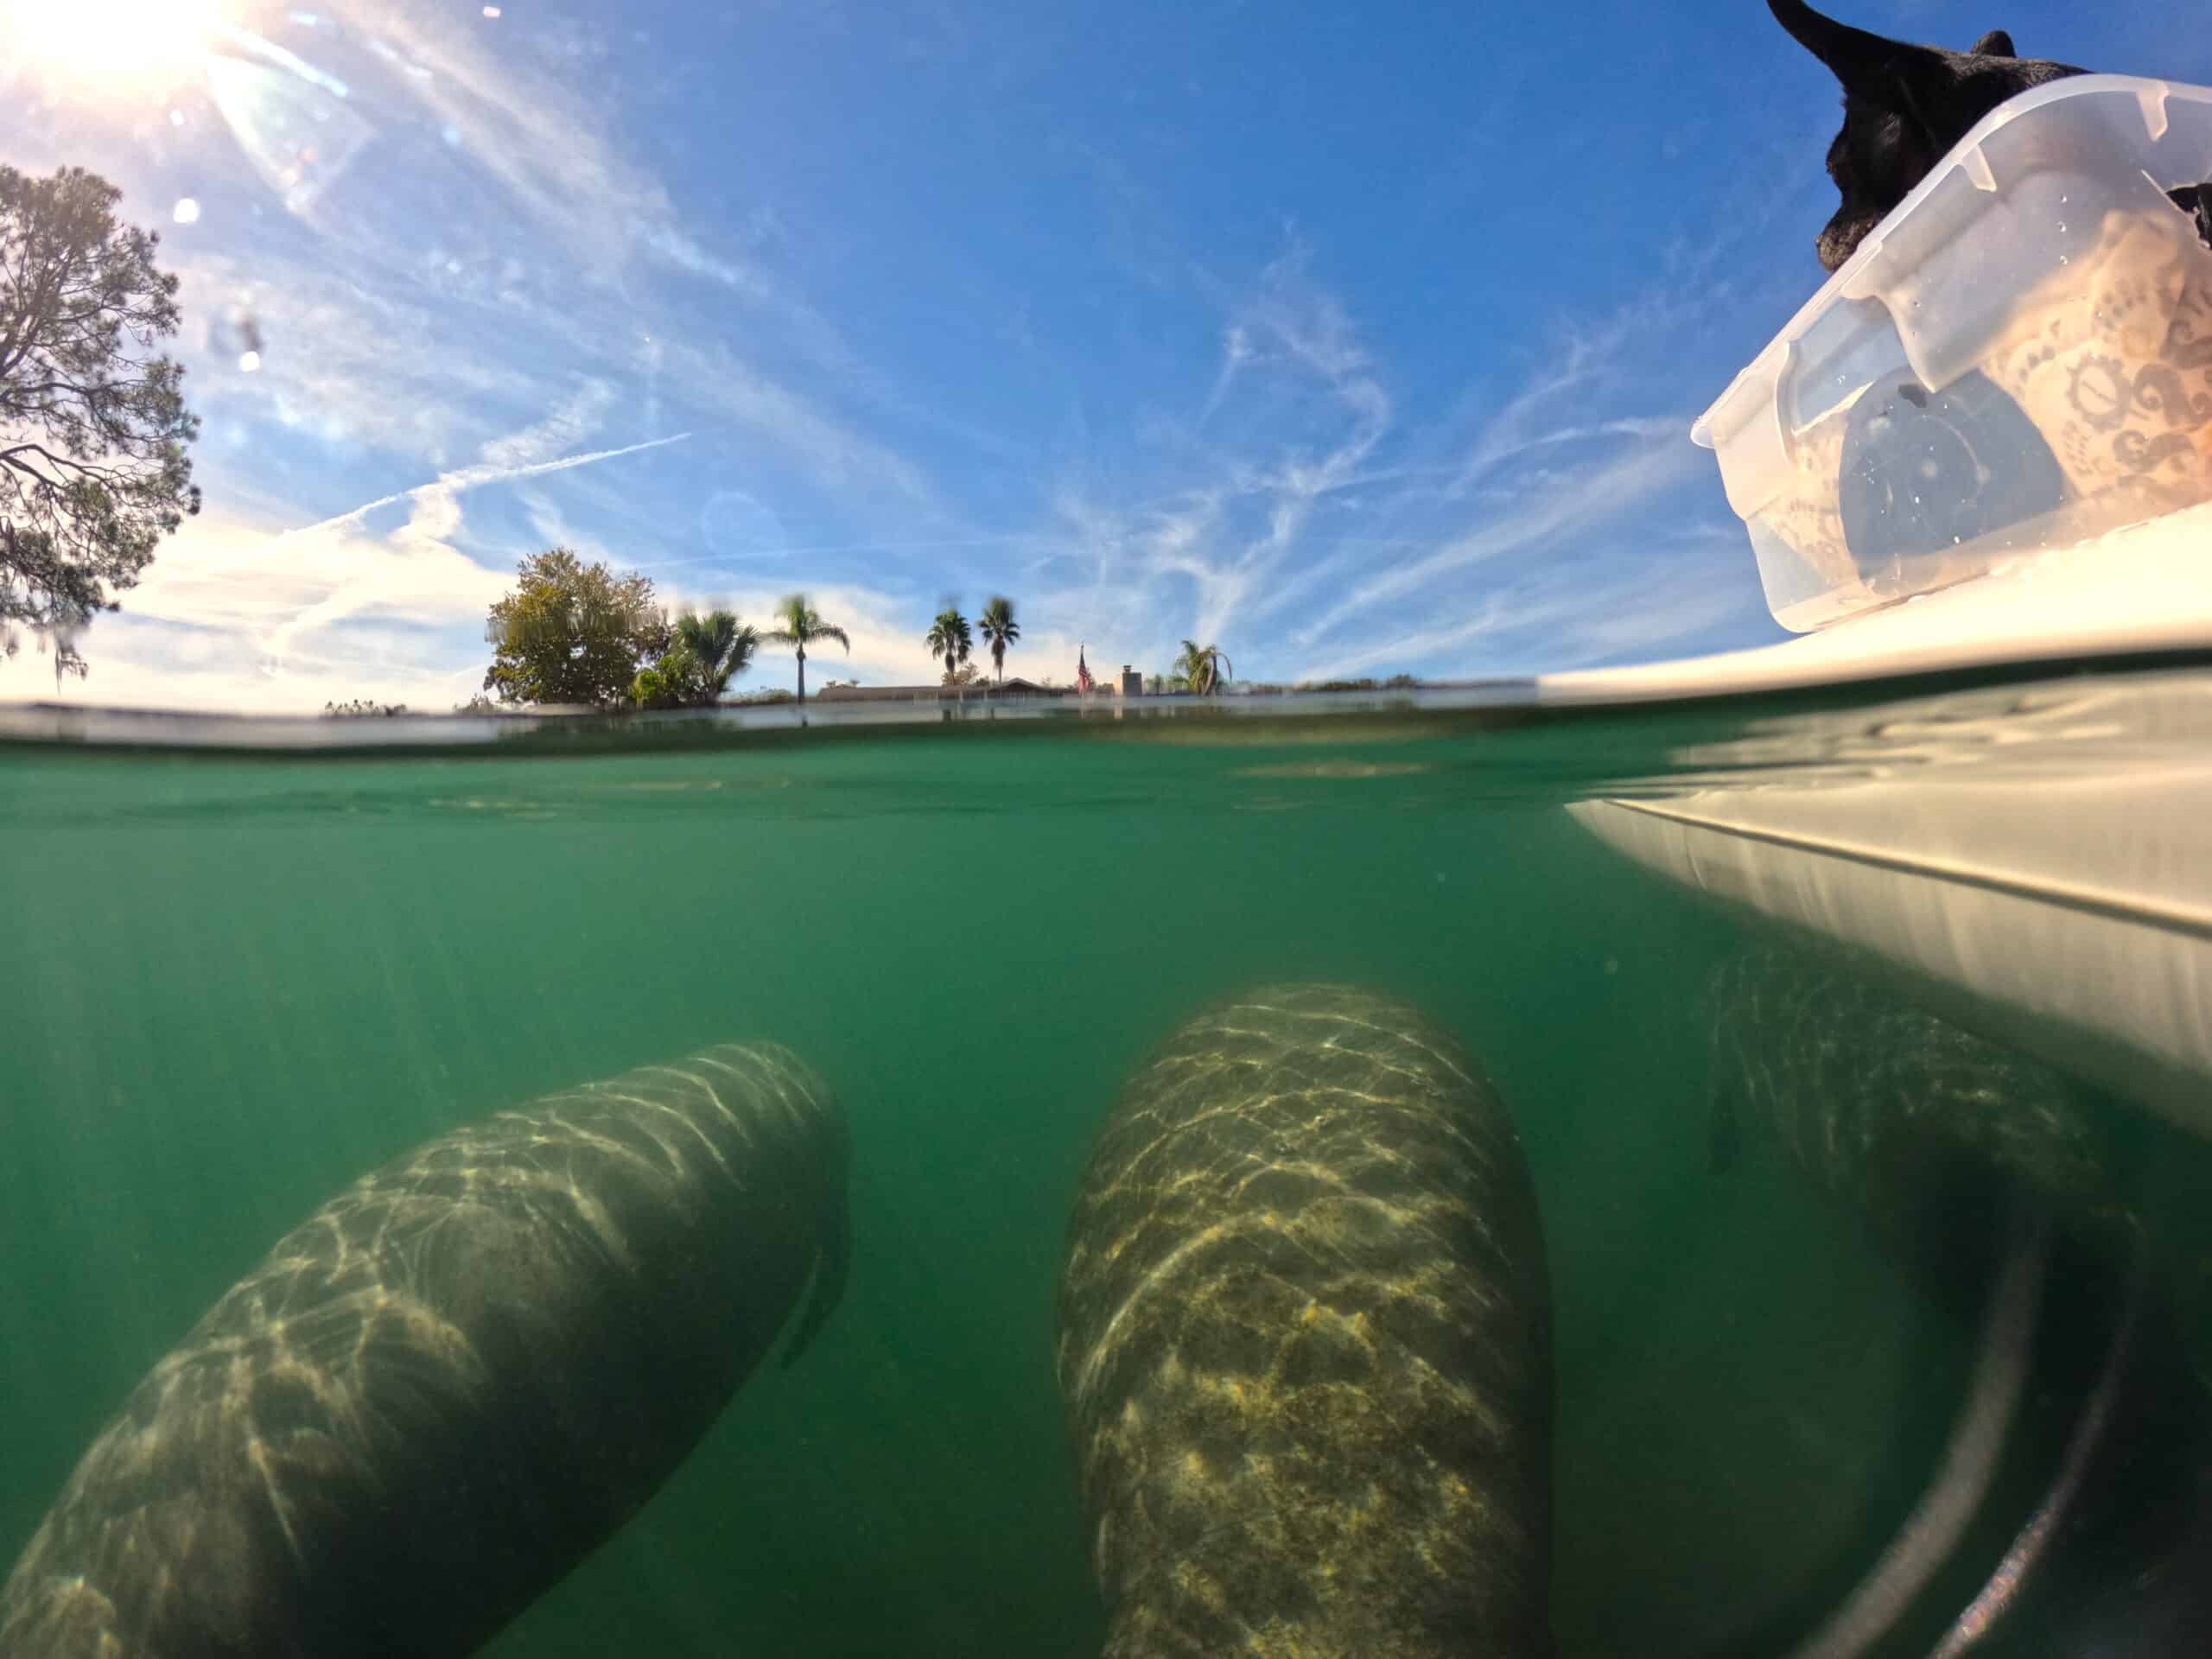 A couple of manatees spotted next to the paddle board.